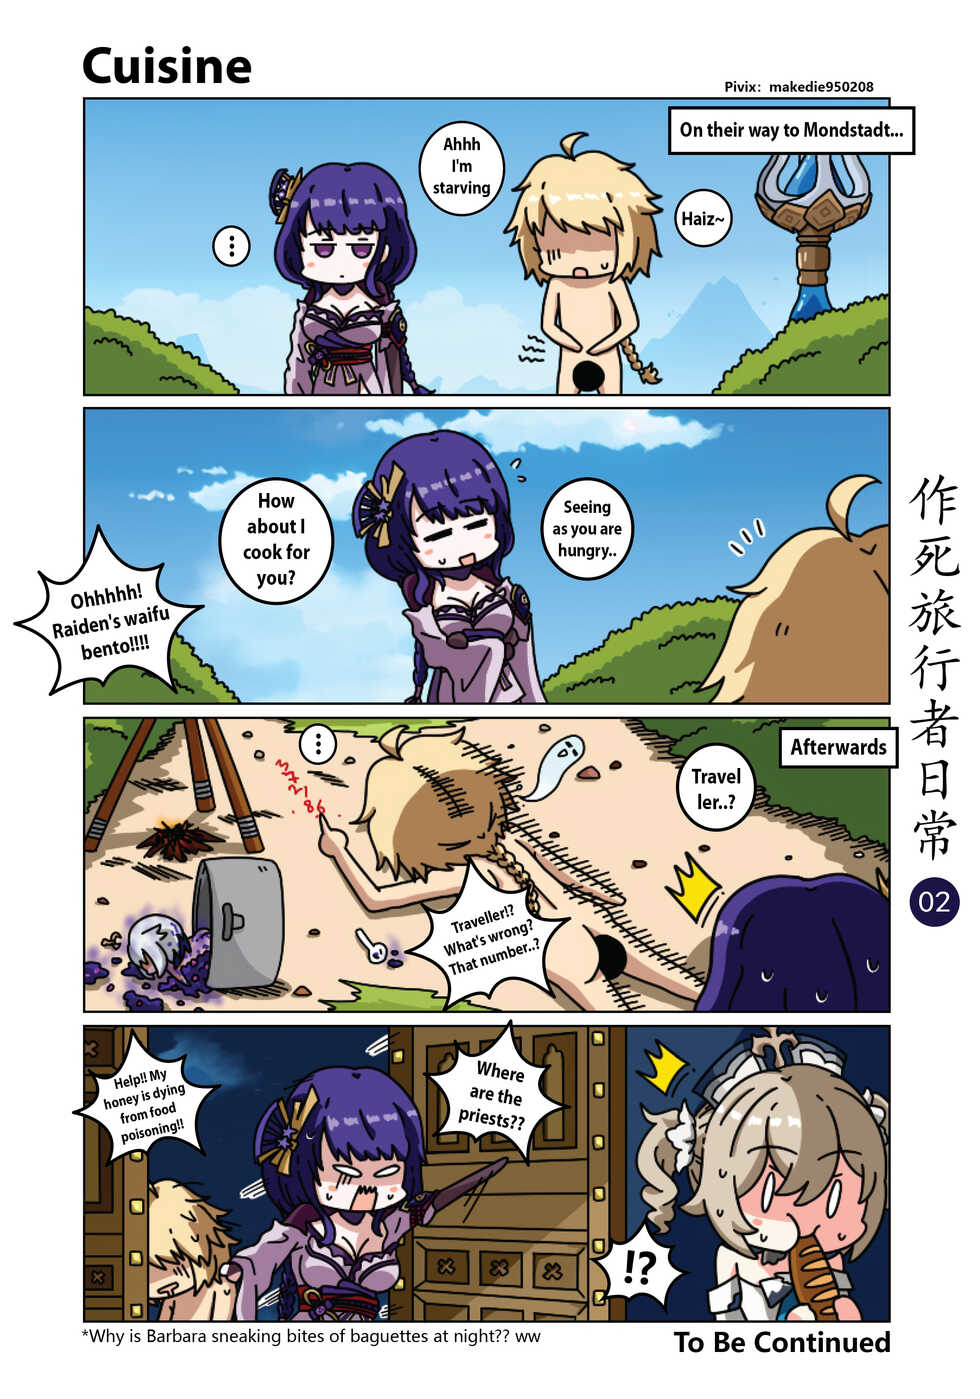 [makedie950208] Dead Traveler Daily [english] - Page 2